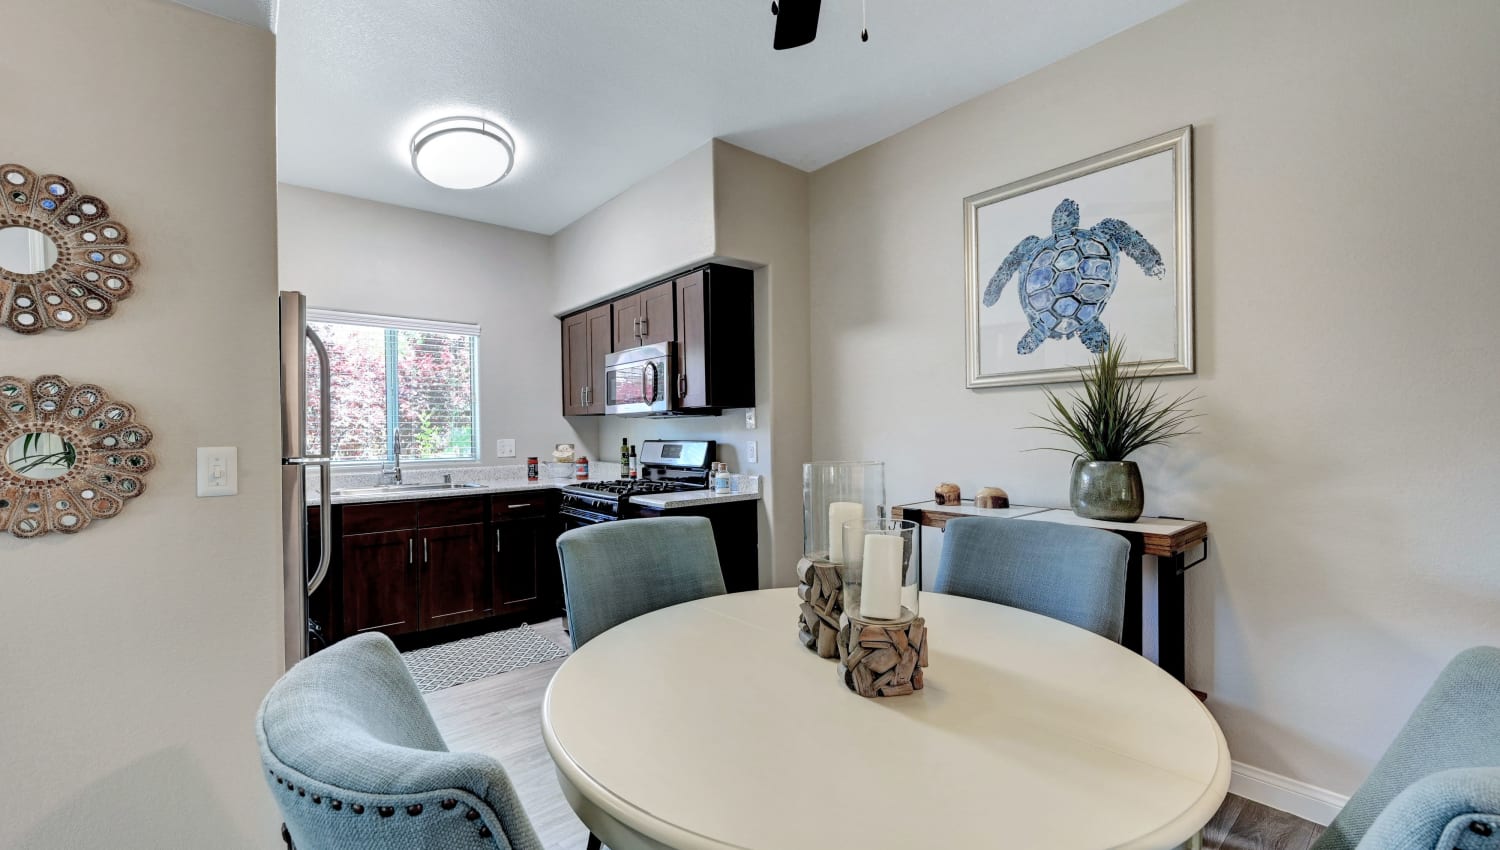 Model kitchen and dining area at Canyon Villas Apartments in Las Vegas, Nevada